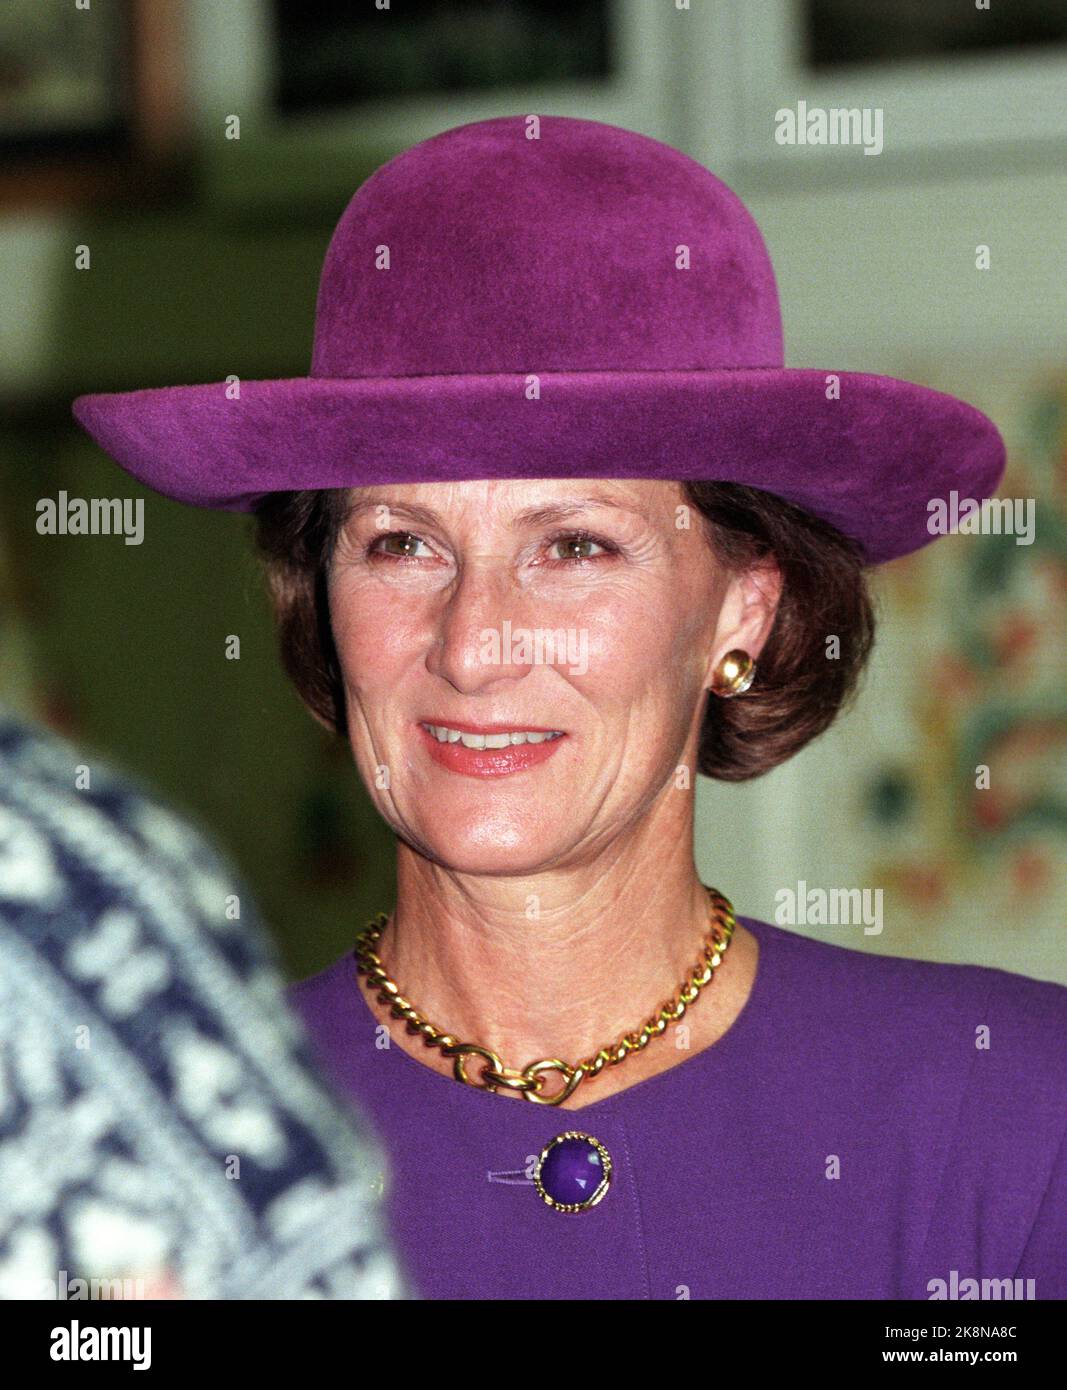 Minneapolis, USA 199510. The royal couple's journey in the United States. King Harald and Queen Sonja on an official visit to the United States. The picture: Queen Sonja visits the heather flower Care Center. (Queen's outfit: Purple suit and hat. Chain and earrings in gold.) Photo: Terje Bendiksby Stock Photo